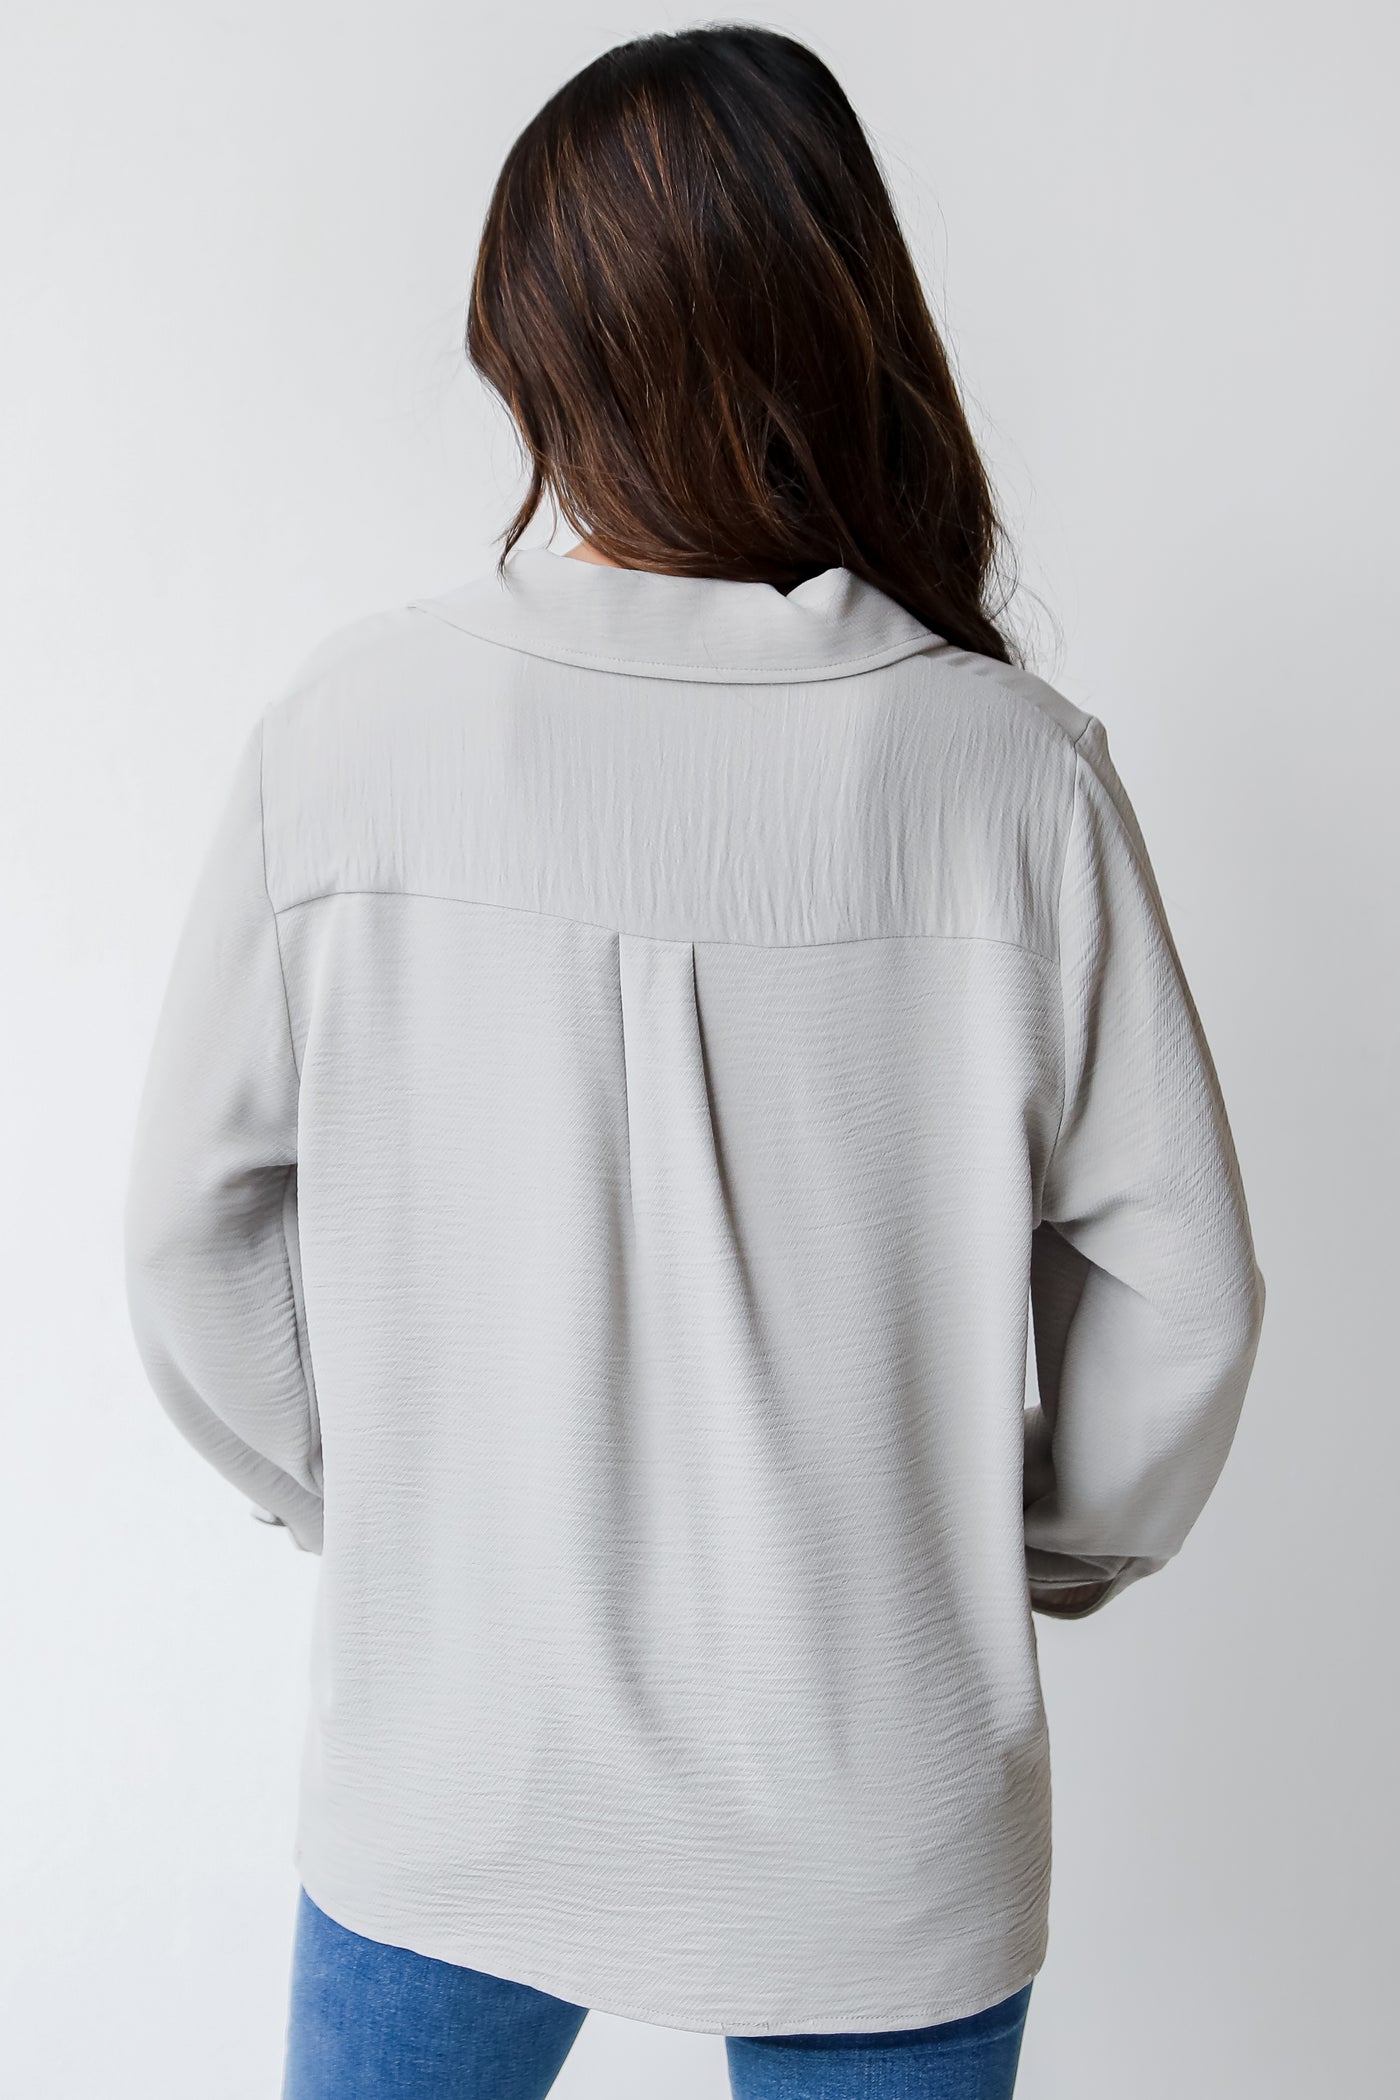 grey collared blouse back view